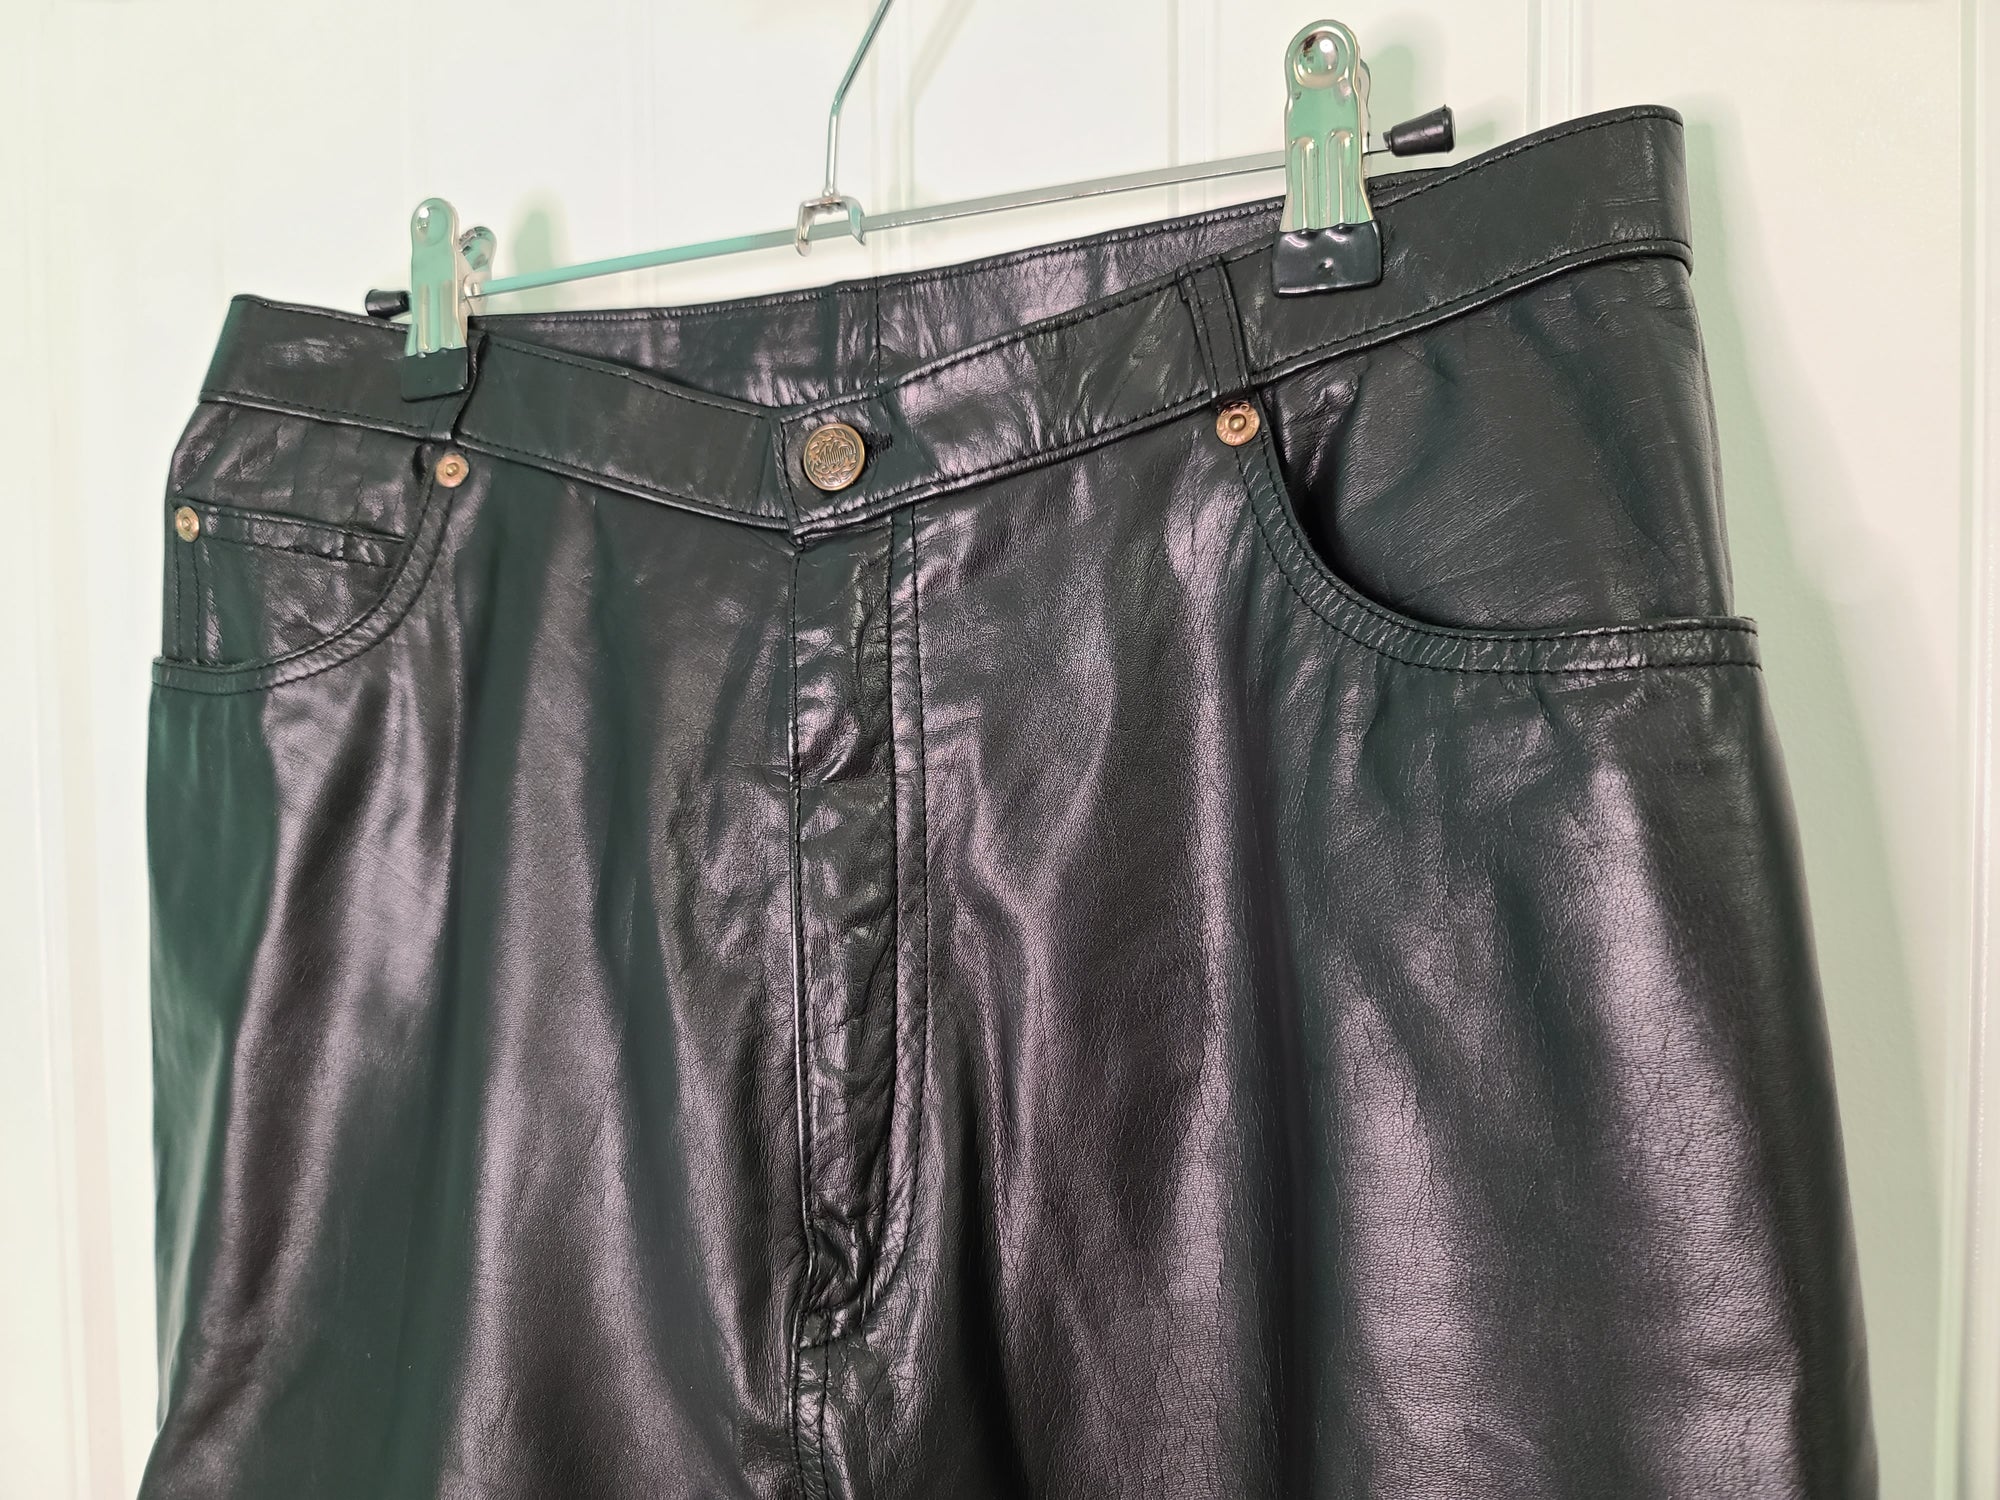 Wilson's Leather Black Leather Pants (16)